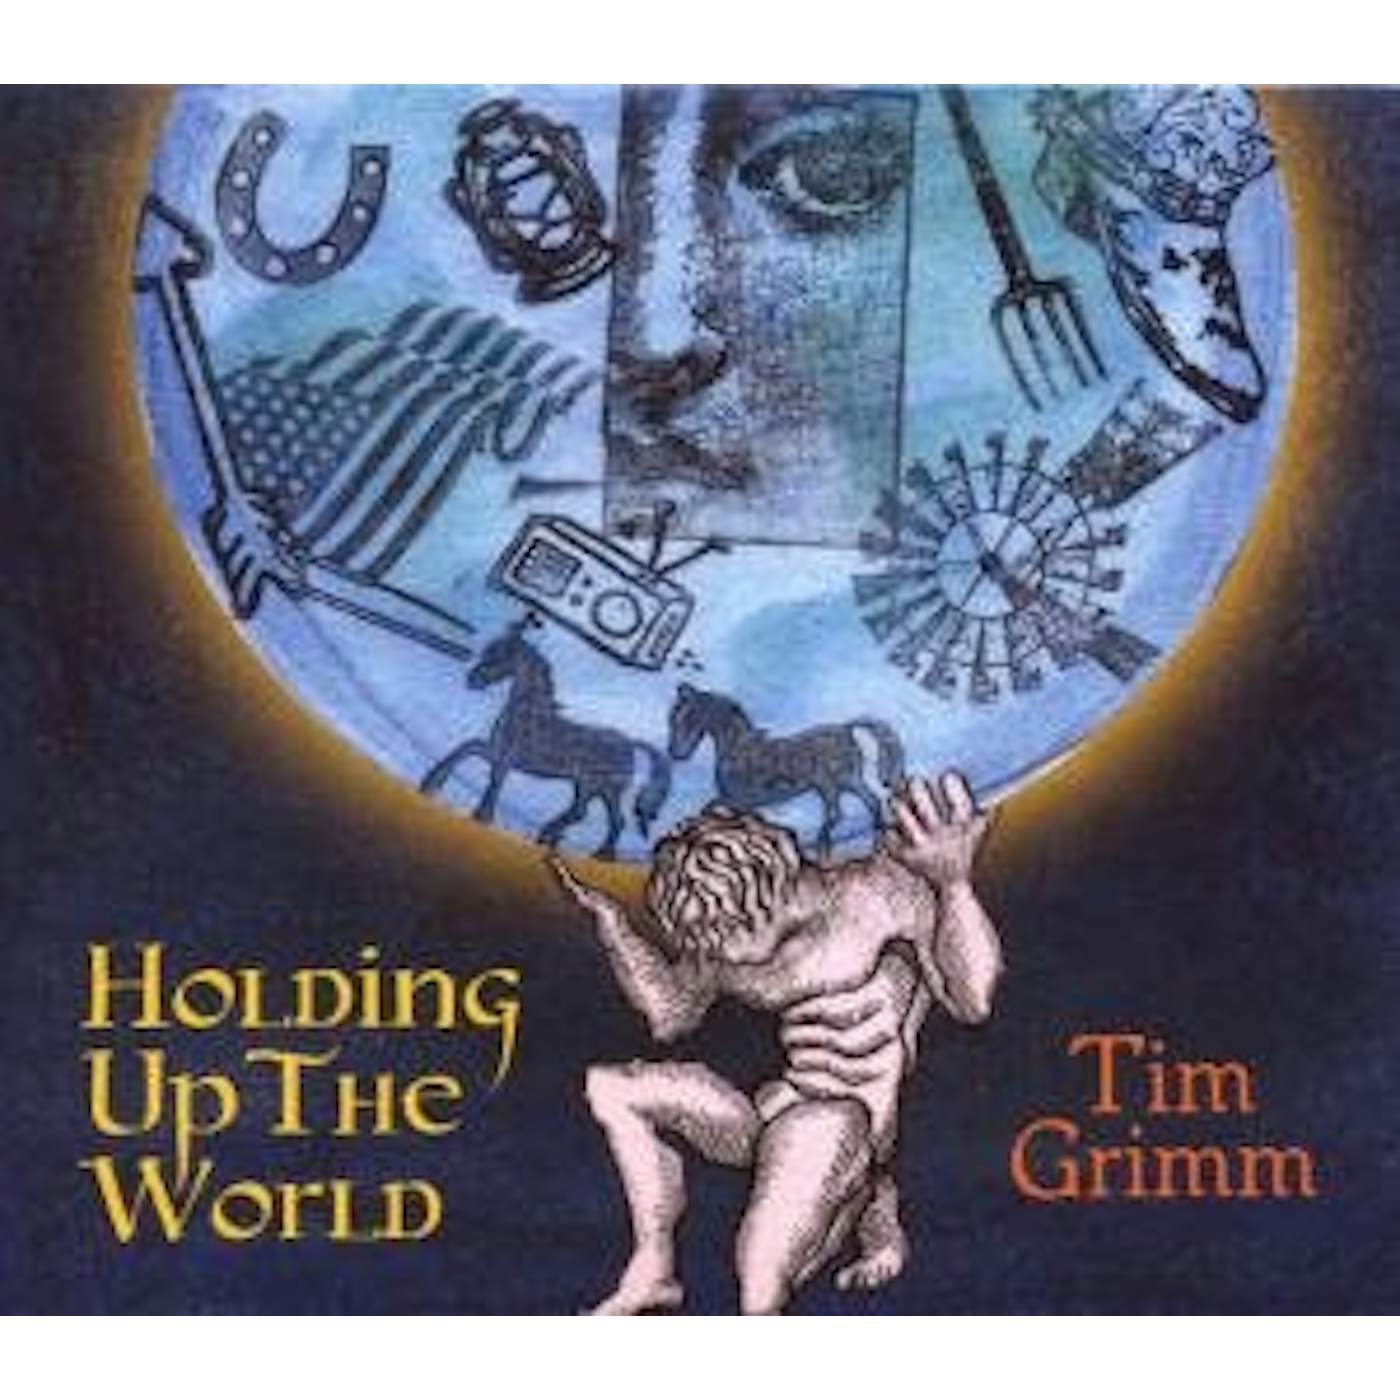 Tim Grimm HOLDING UP THE WORLD CD